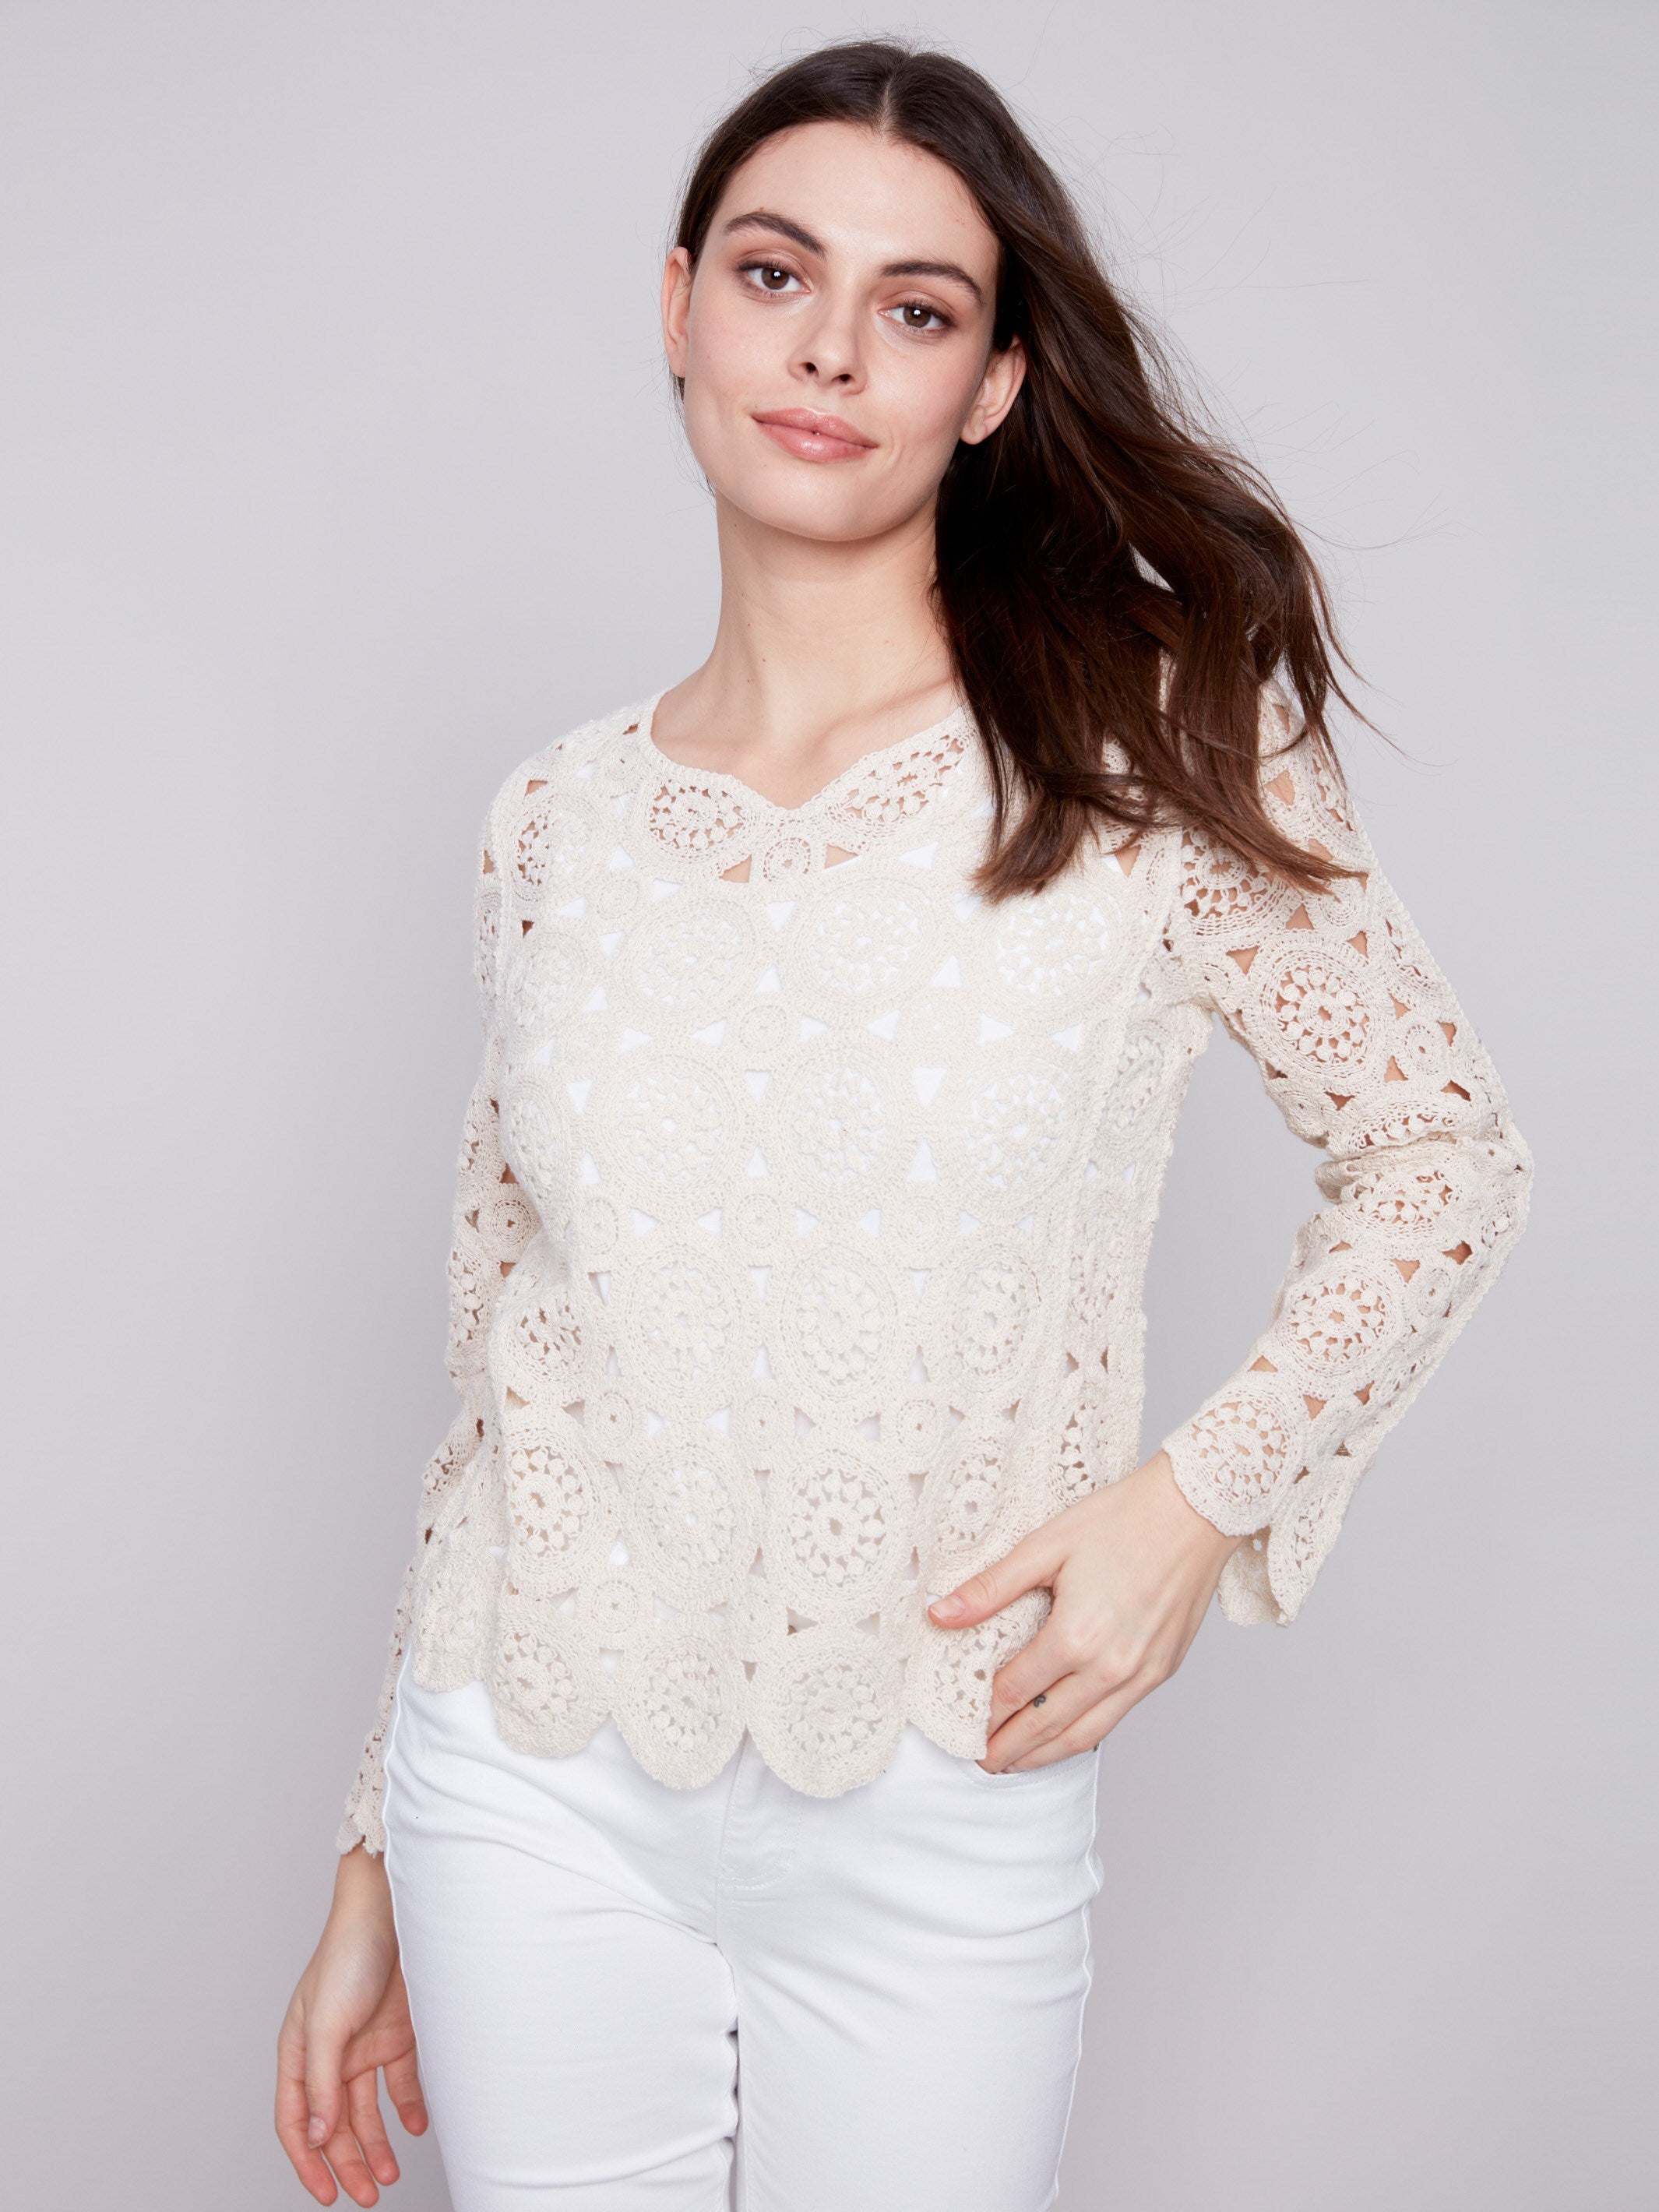 Scalloped Crochet Top - Natural - Charlie B Collection Canada - Image 5